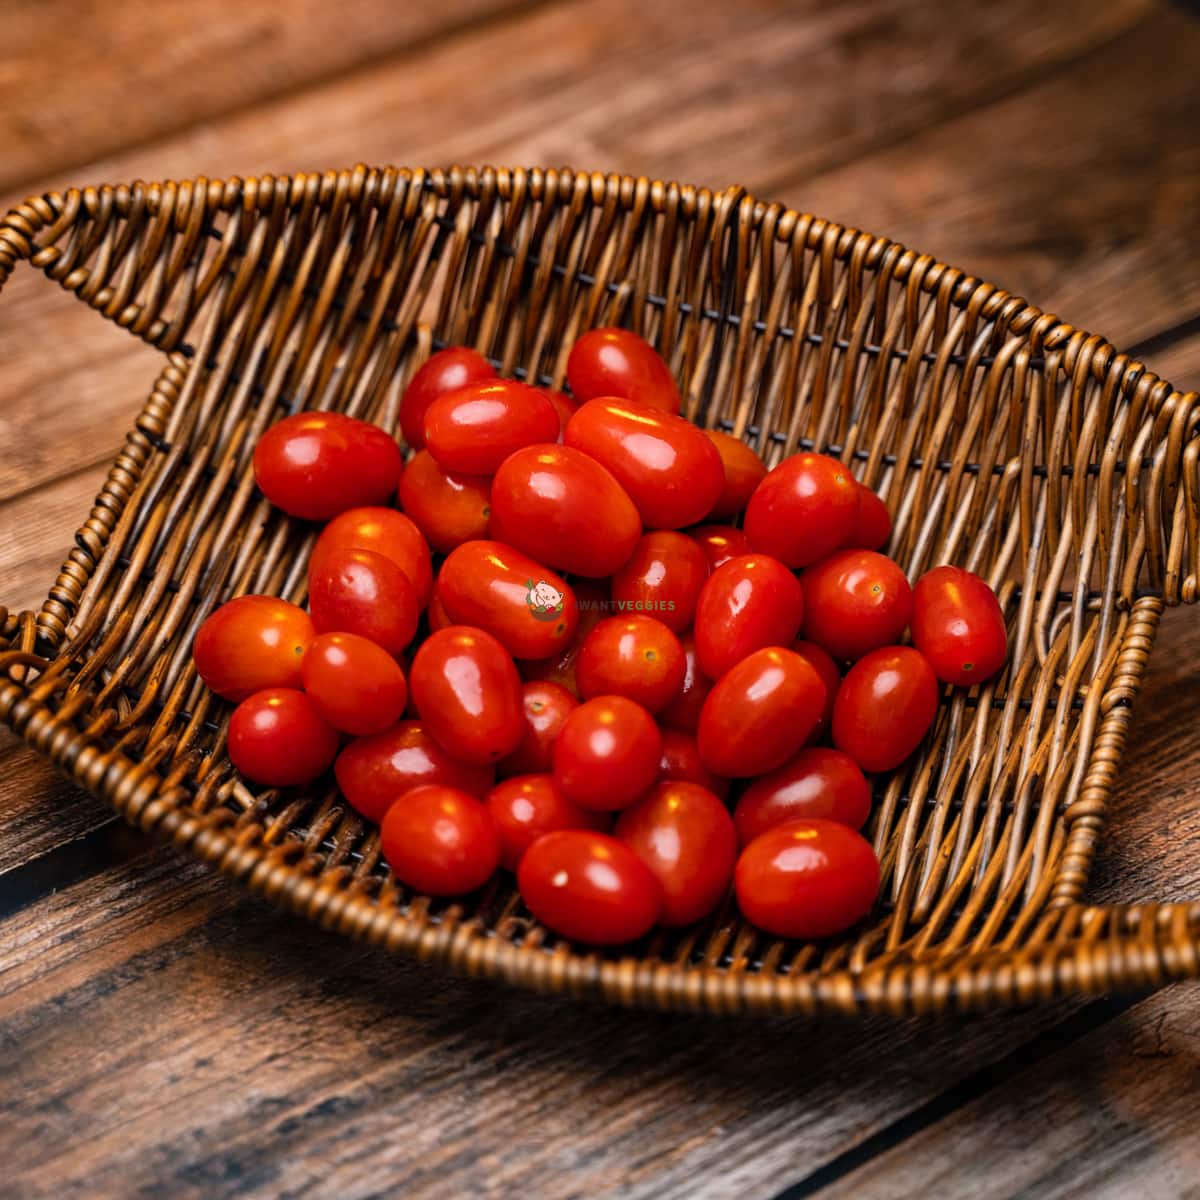 A wooden basket filled with red cherry tomatoes, some of which are still attached to their vines. The tomatoes are ripe and juicy, with a deep red color.